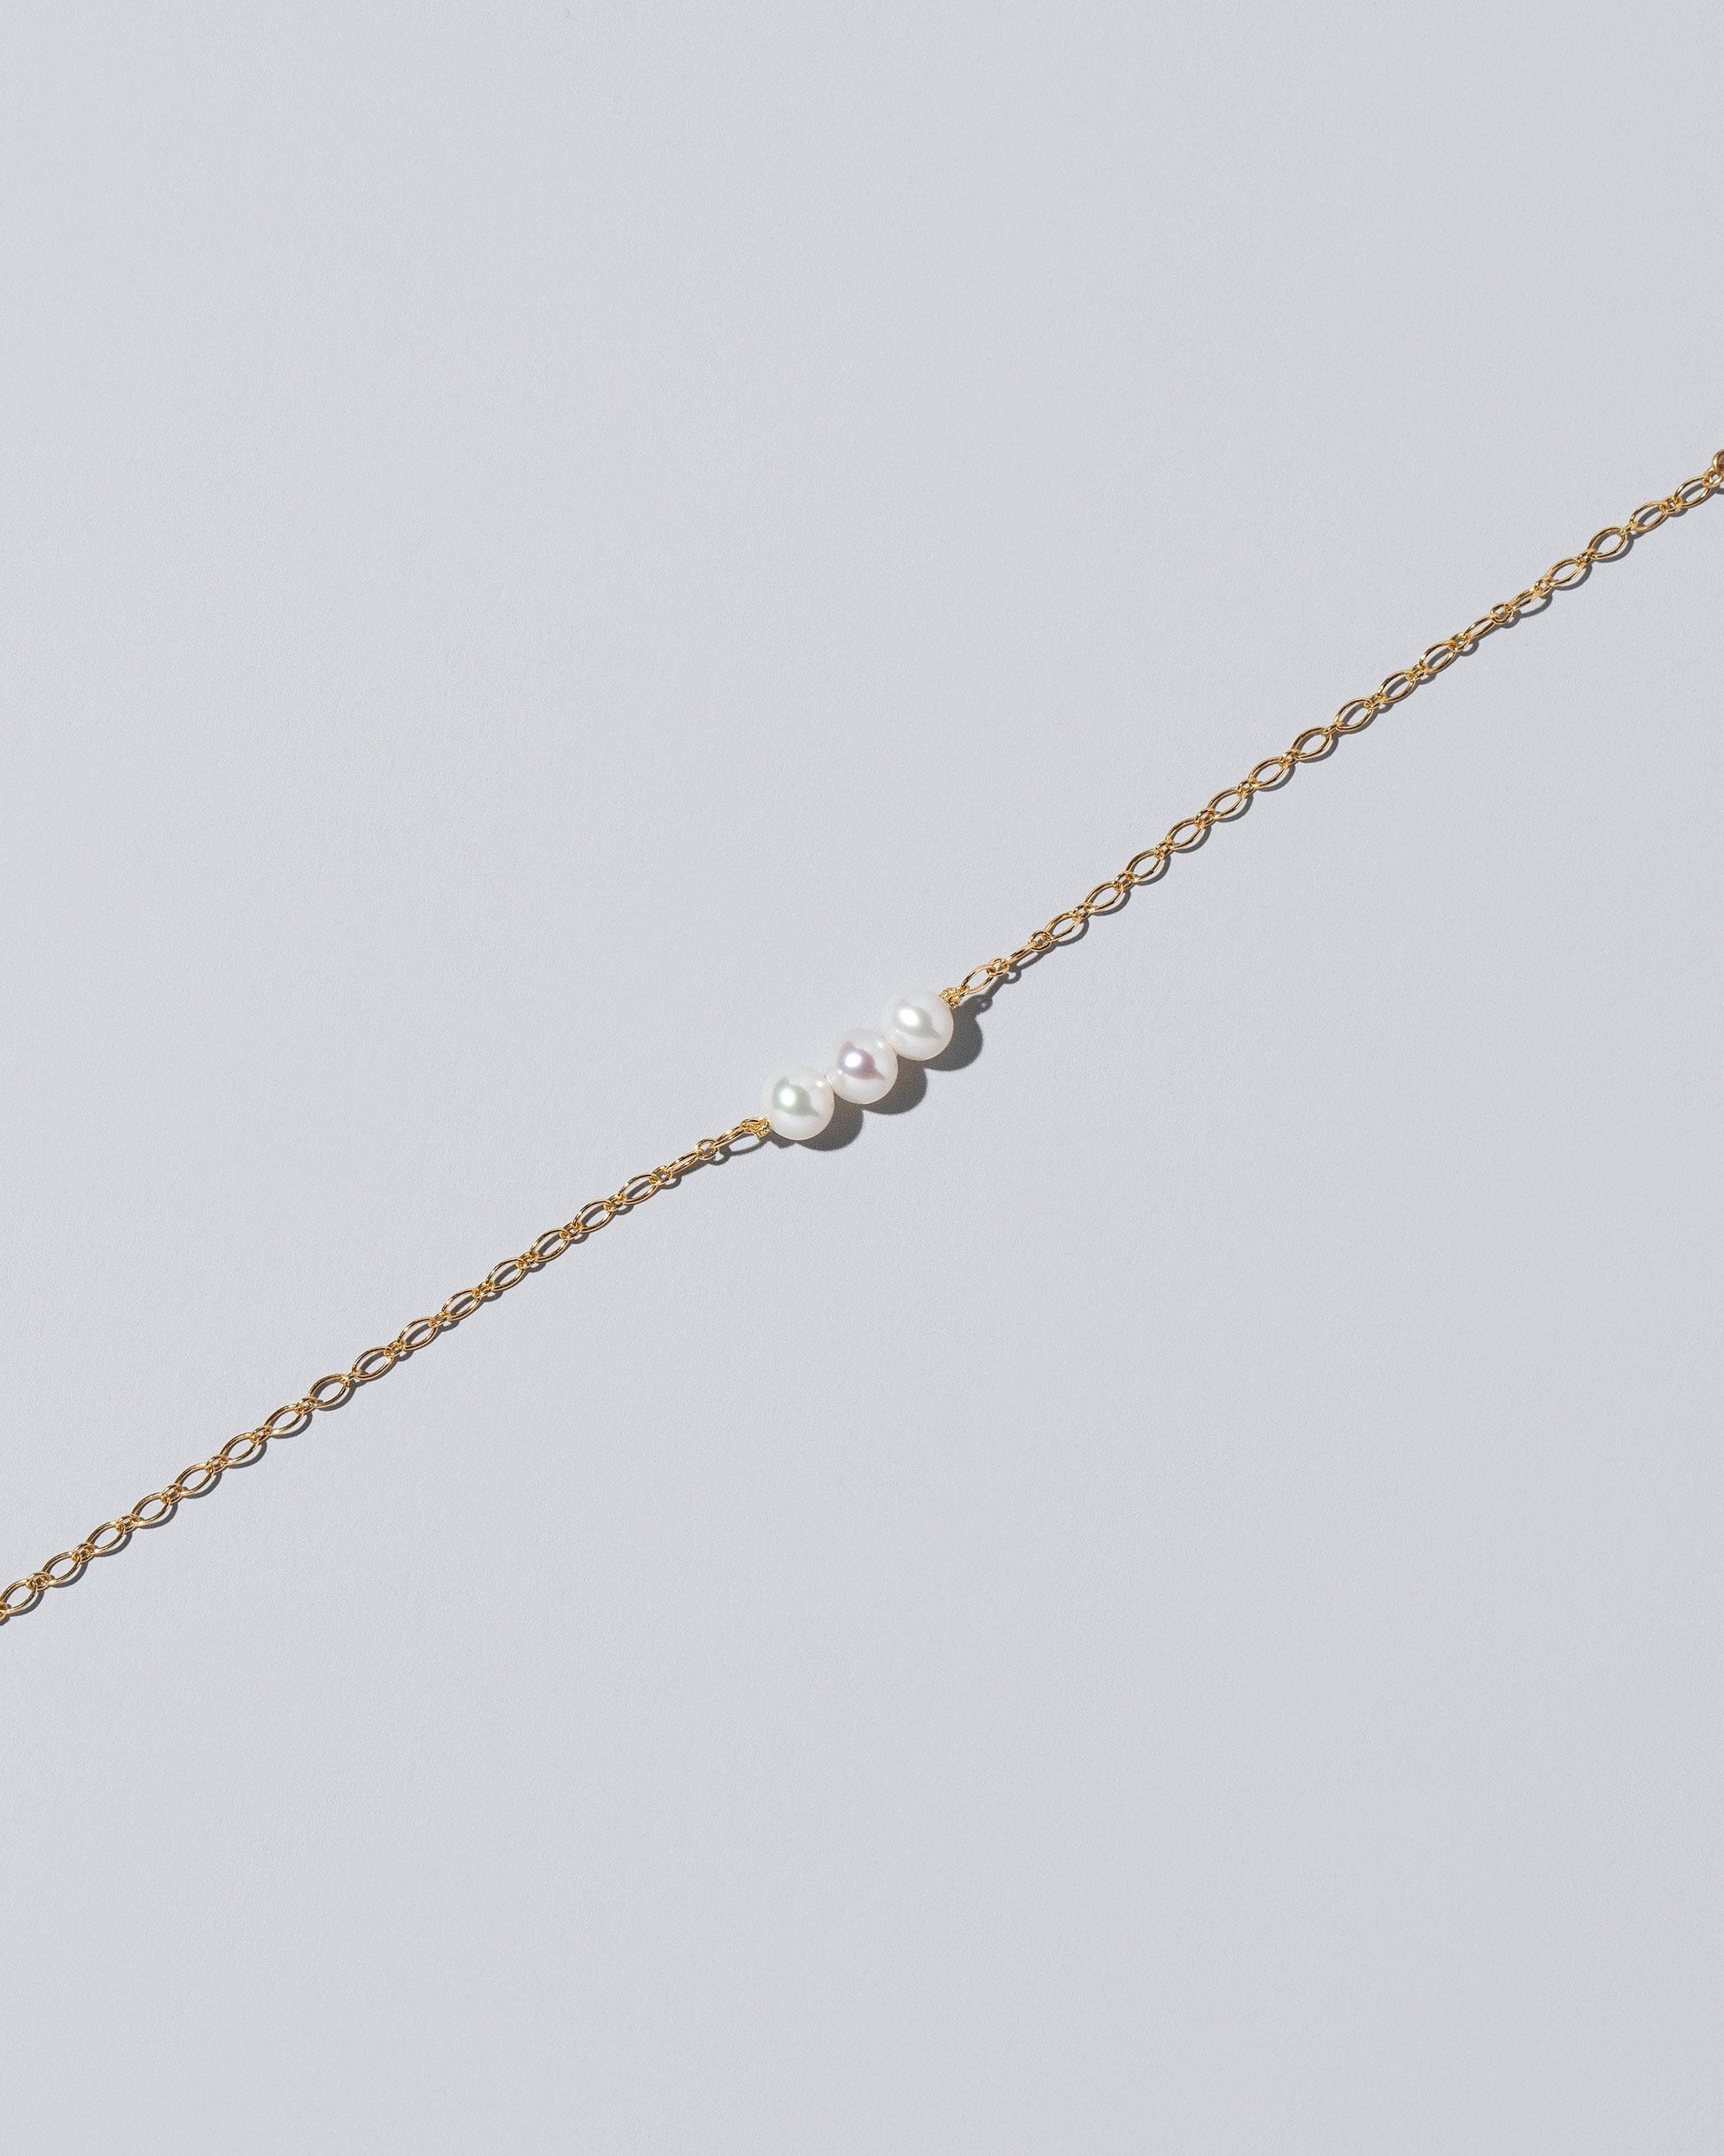 Closeup details of the Three Pearl Station Bracelet Open Oval Chain on light color background.